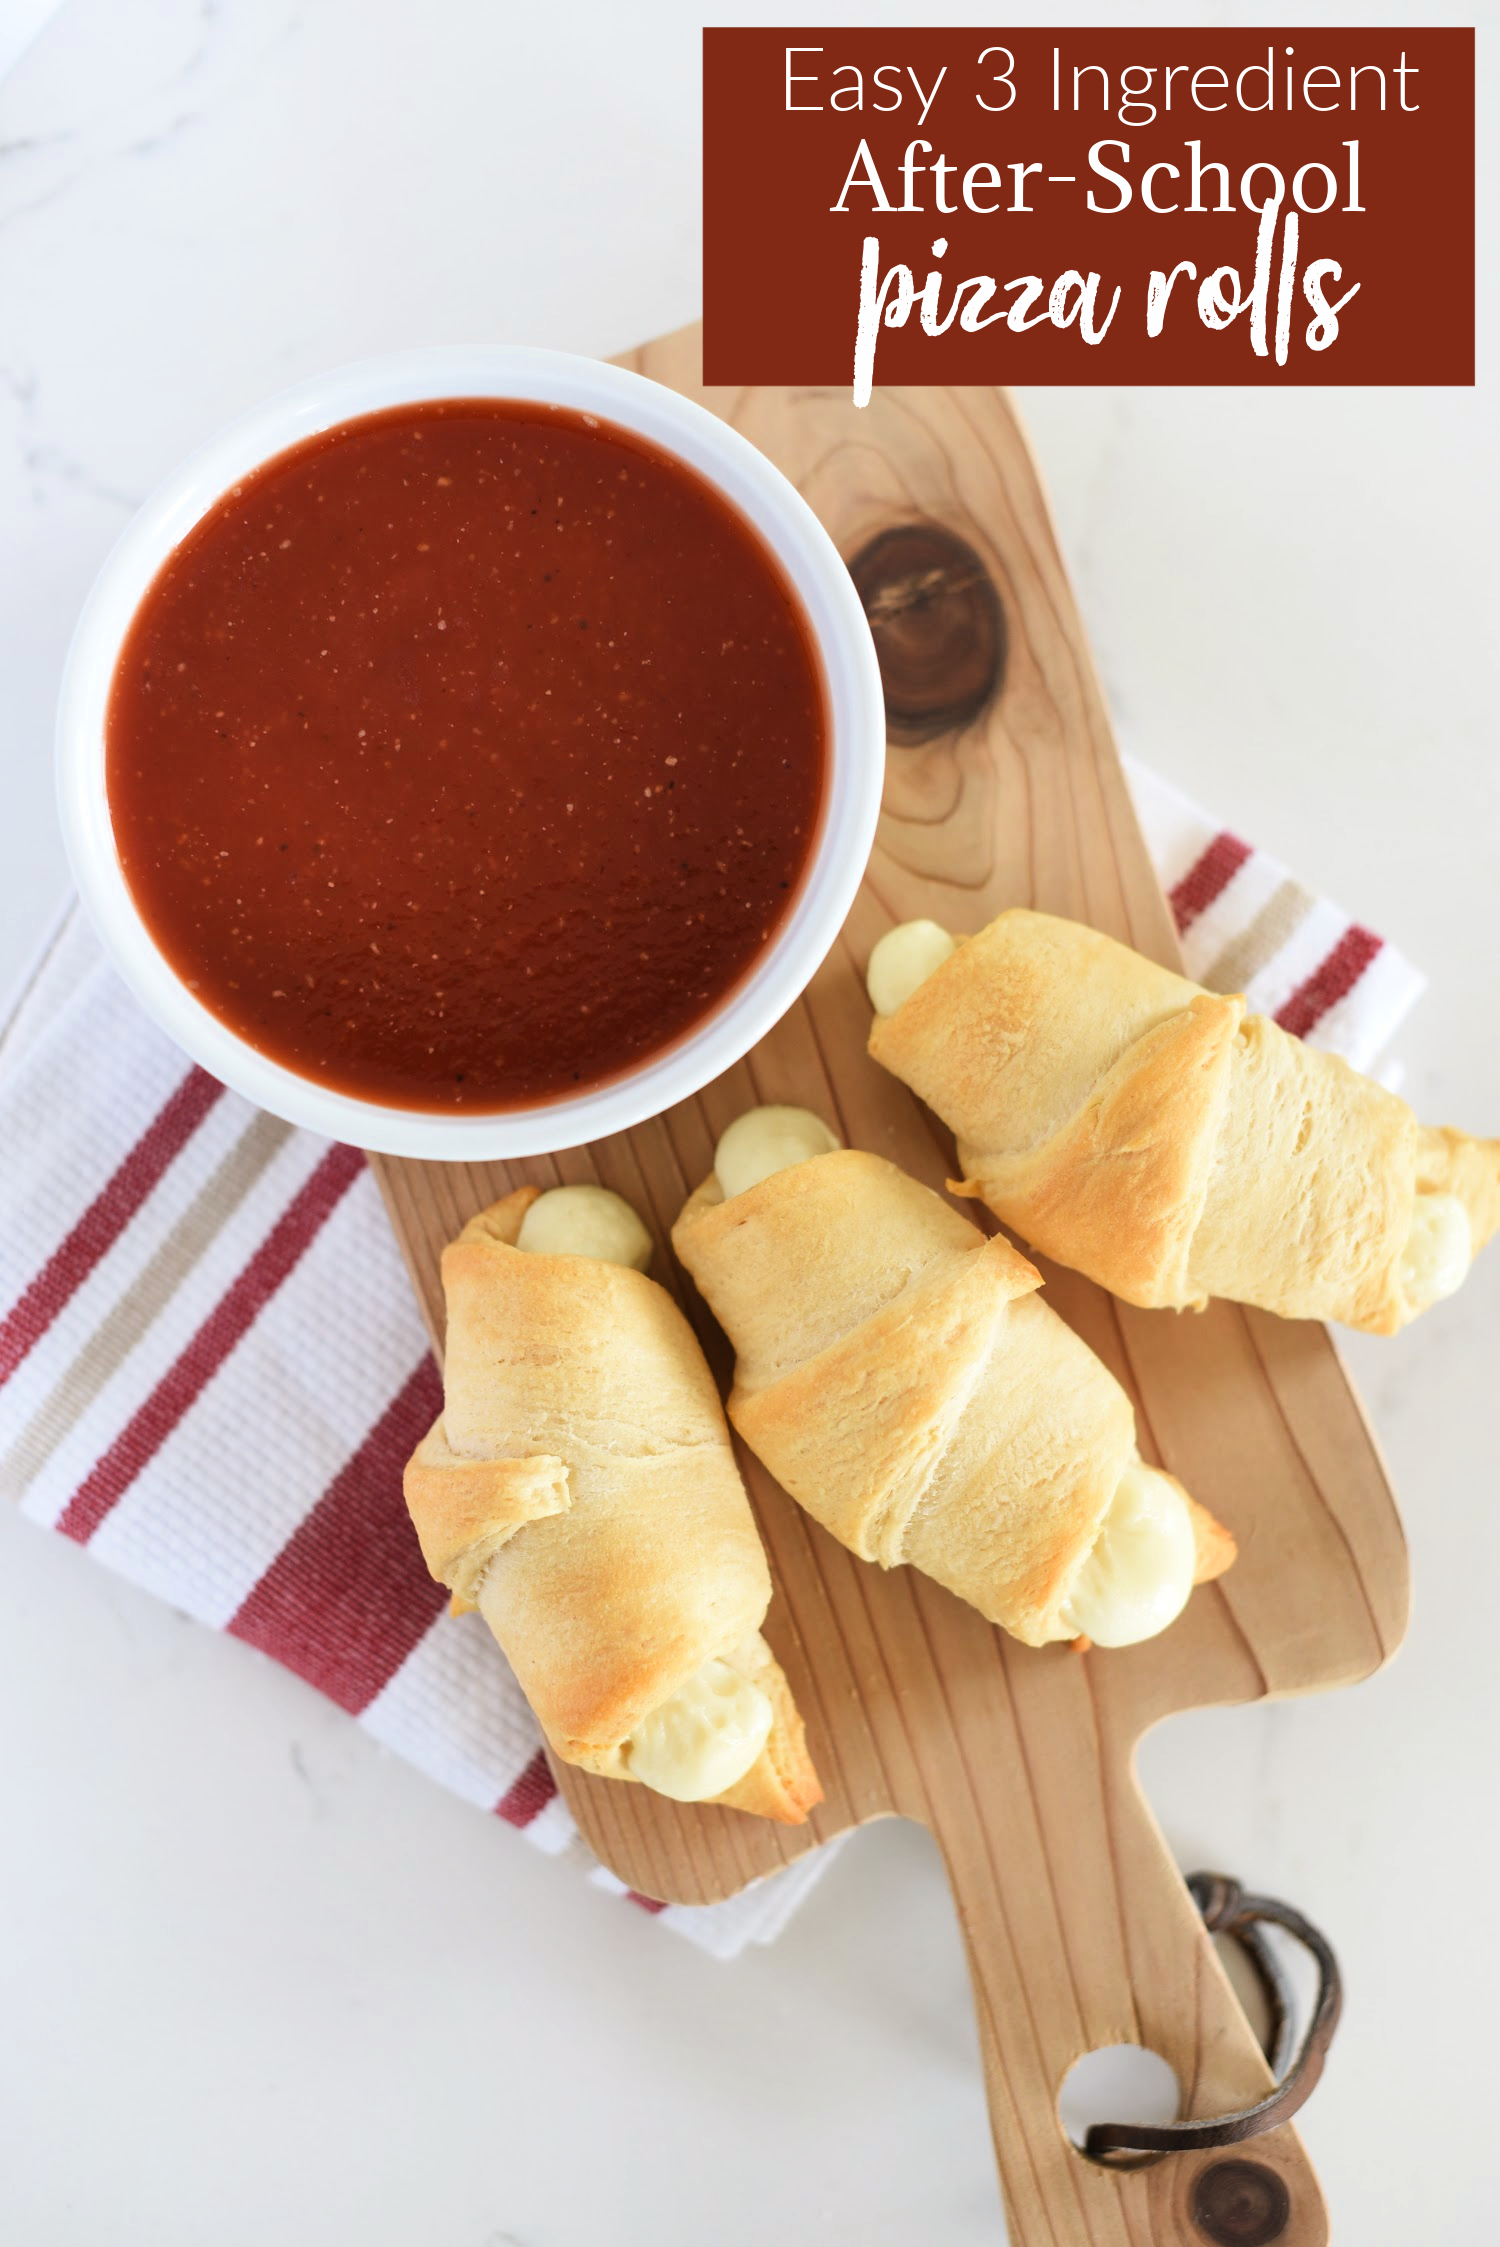 Easy 3 Ingredient Pizza Rolls that your kids will LOVE!